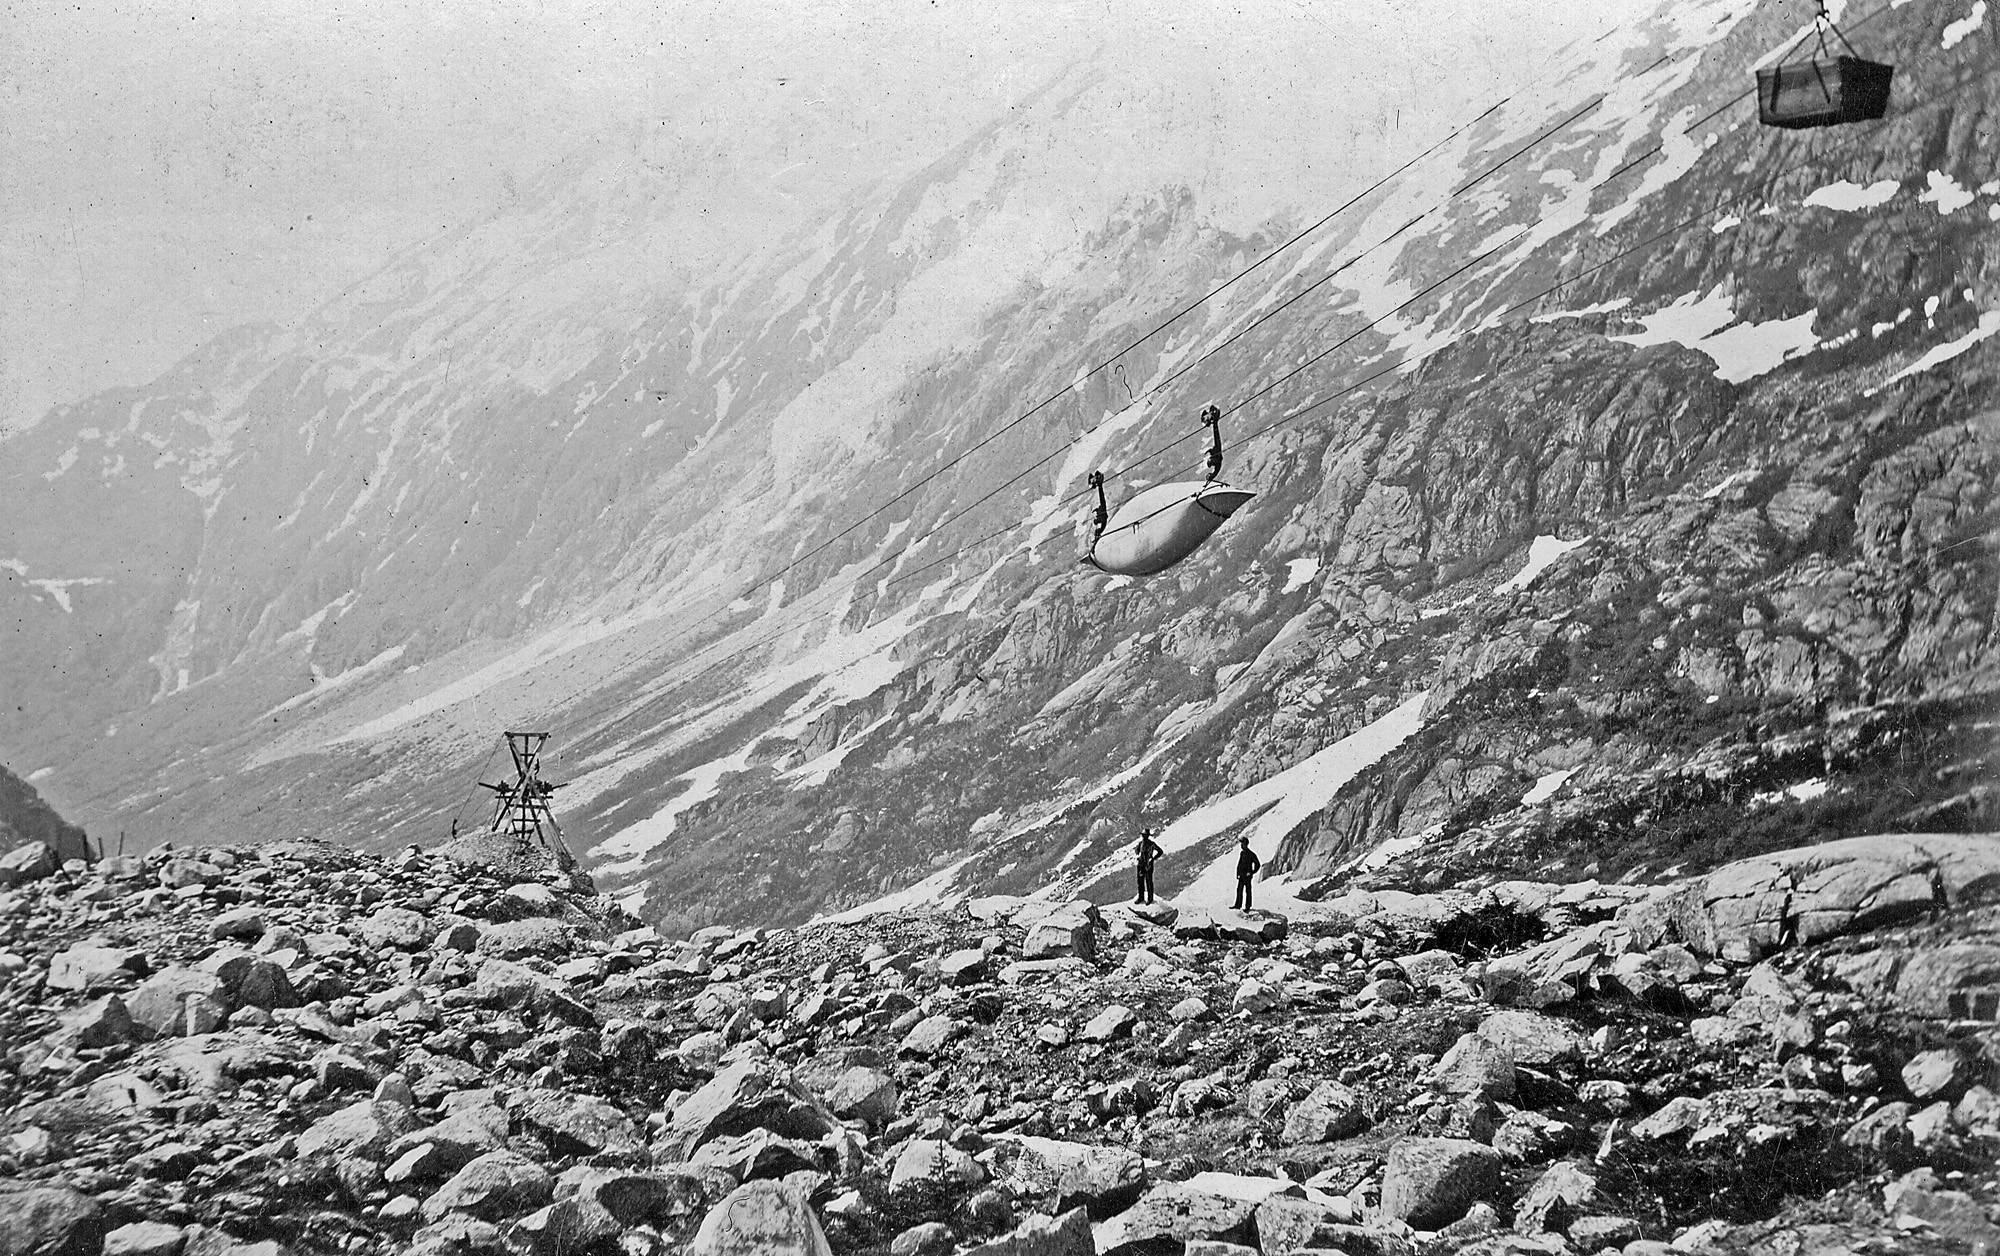 Long Hill, Chilkoot Trail, looking southwest. This view shows the Chilkoot Railroad & Transport Company (CR&T) aerial tramway in operation. One of the CR&T tramway towers is in the background left and a canoe and crate are being hauled over the line toward the summit of the Chilkoot Trail. Two men, possibly tramway workers, are observing the load. This photograph was taken on Long Hill between Sheep Camp and the Scales between the spring-fall of 1898-1899. Image courtesy of the National Park Service, Klondike Gold Rush National Historical Park, Candy Waugaman Collection, KLGO LH-68-8973.